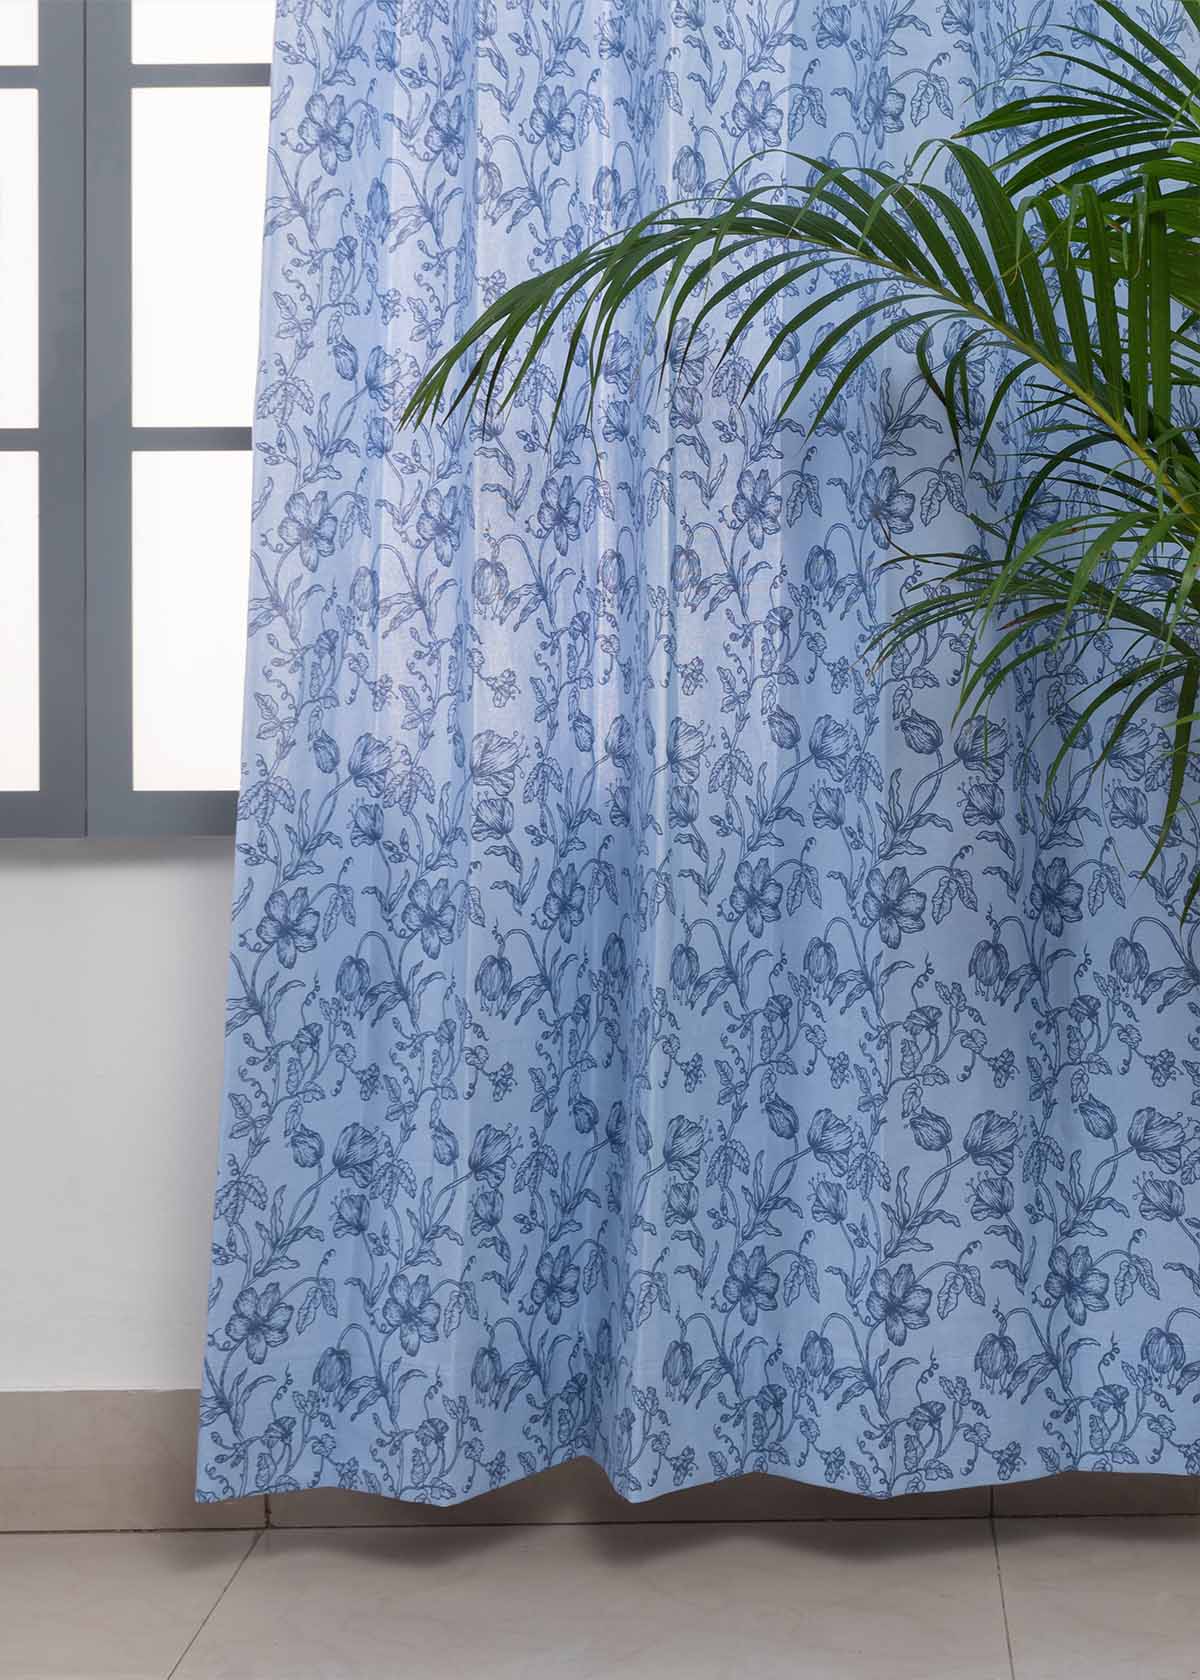 French Farmhouse 100% cotton floral curtain for living room - Room darkening - Blue - Pack of 1